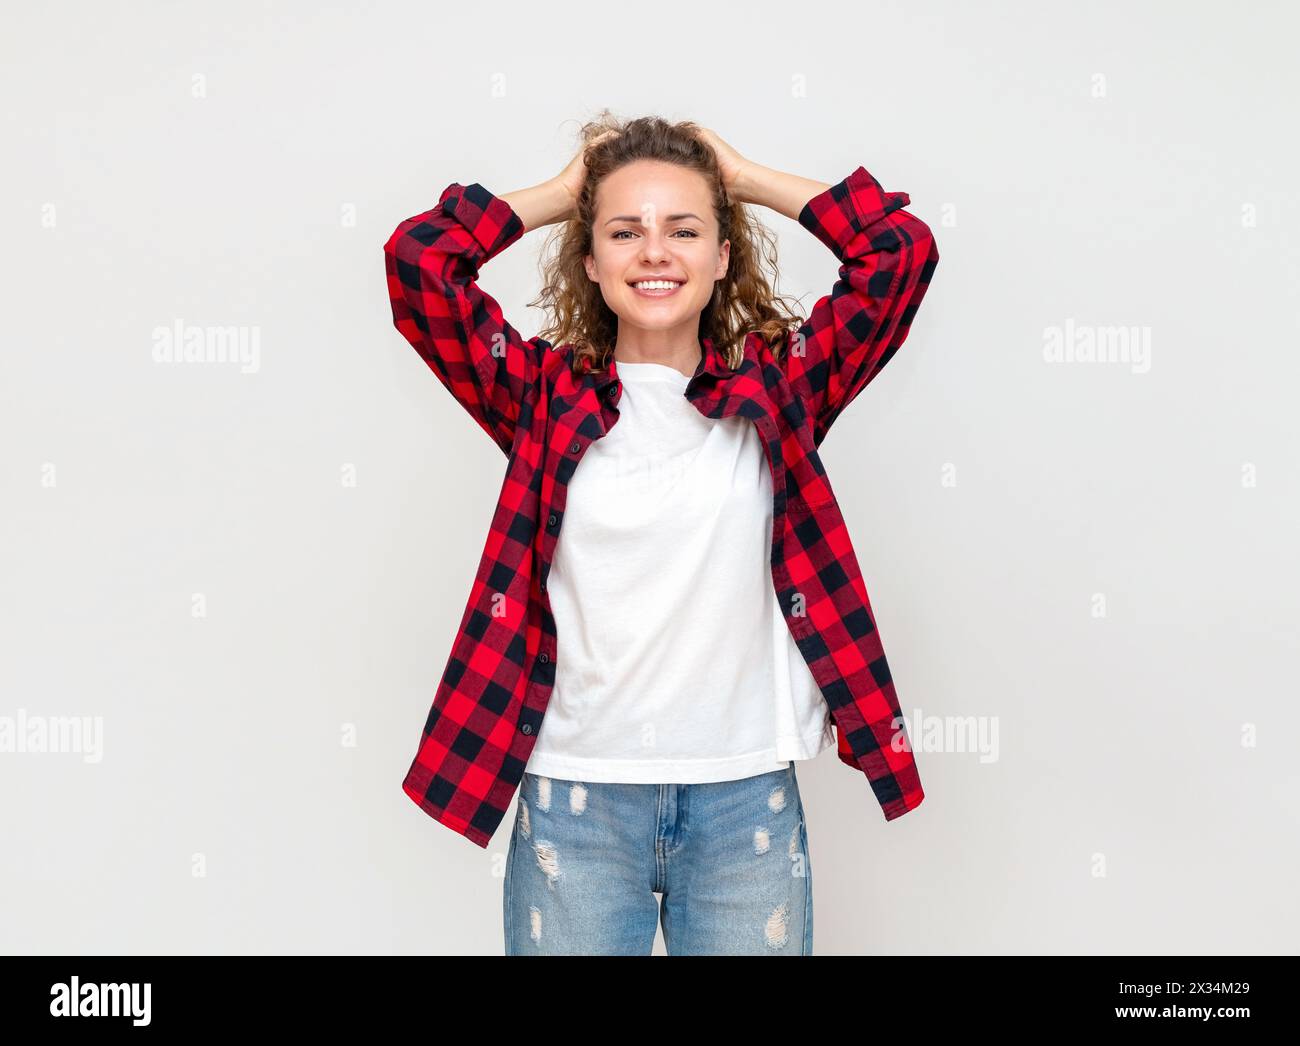 Happy woman holds hands behind her head smiles expressing delight anticipation emotions in front of light plain background in studio. Stock Photo